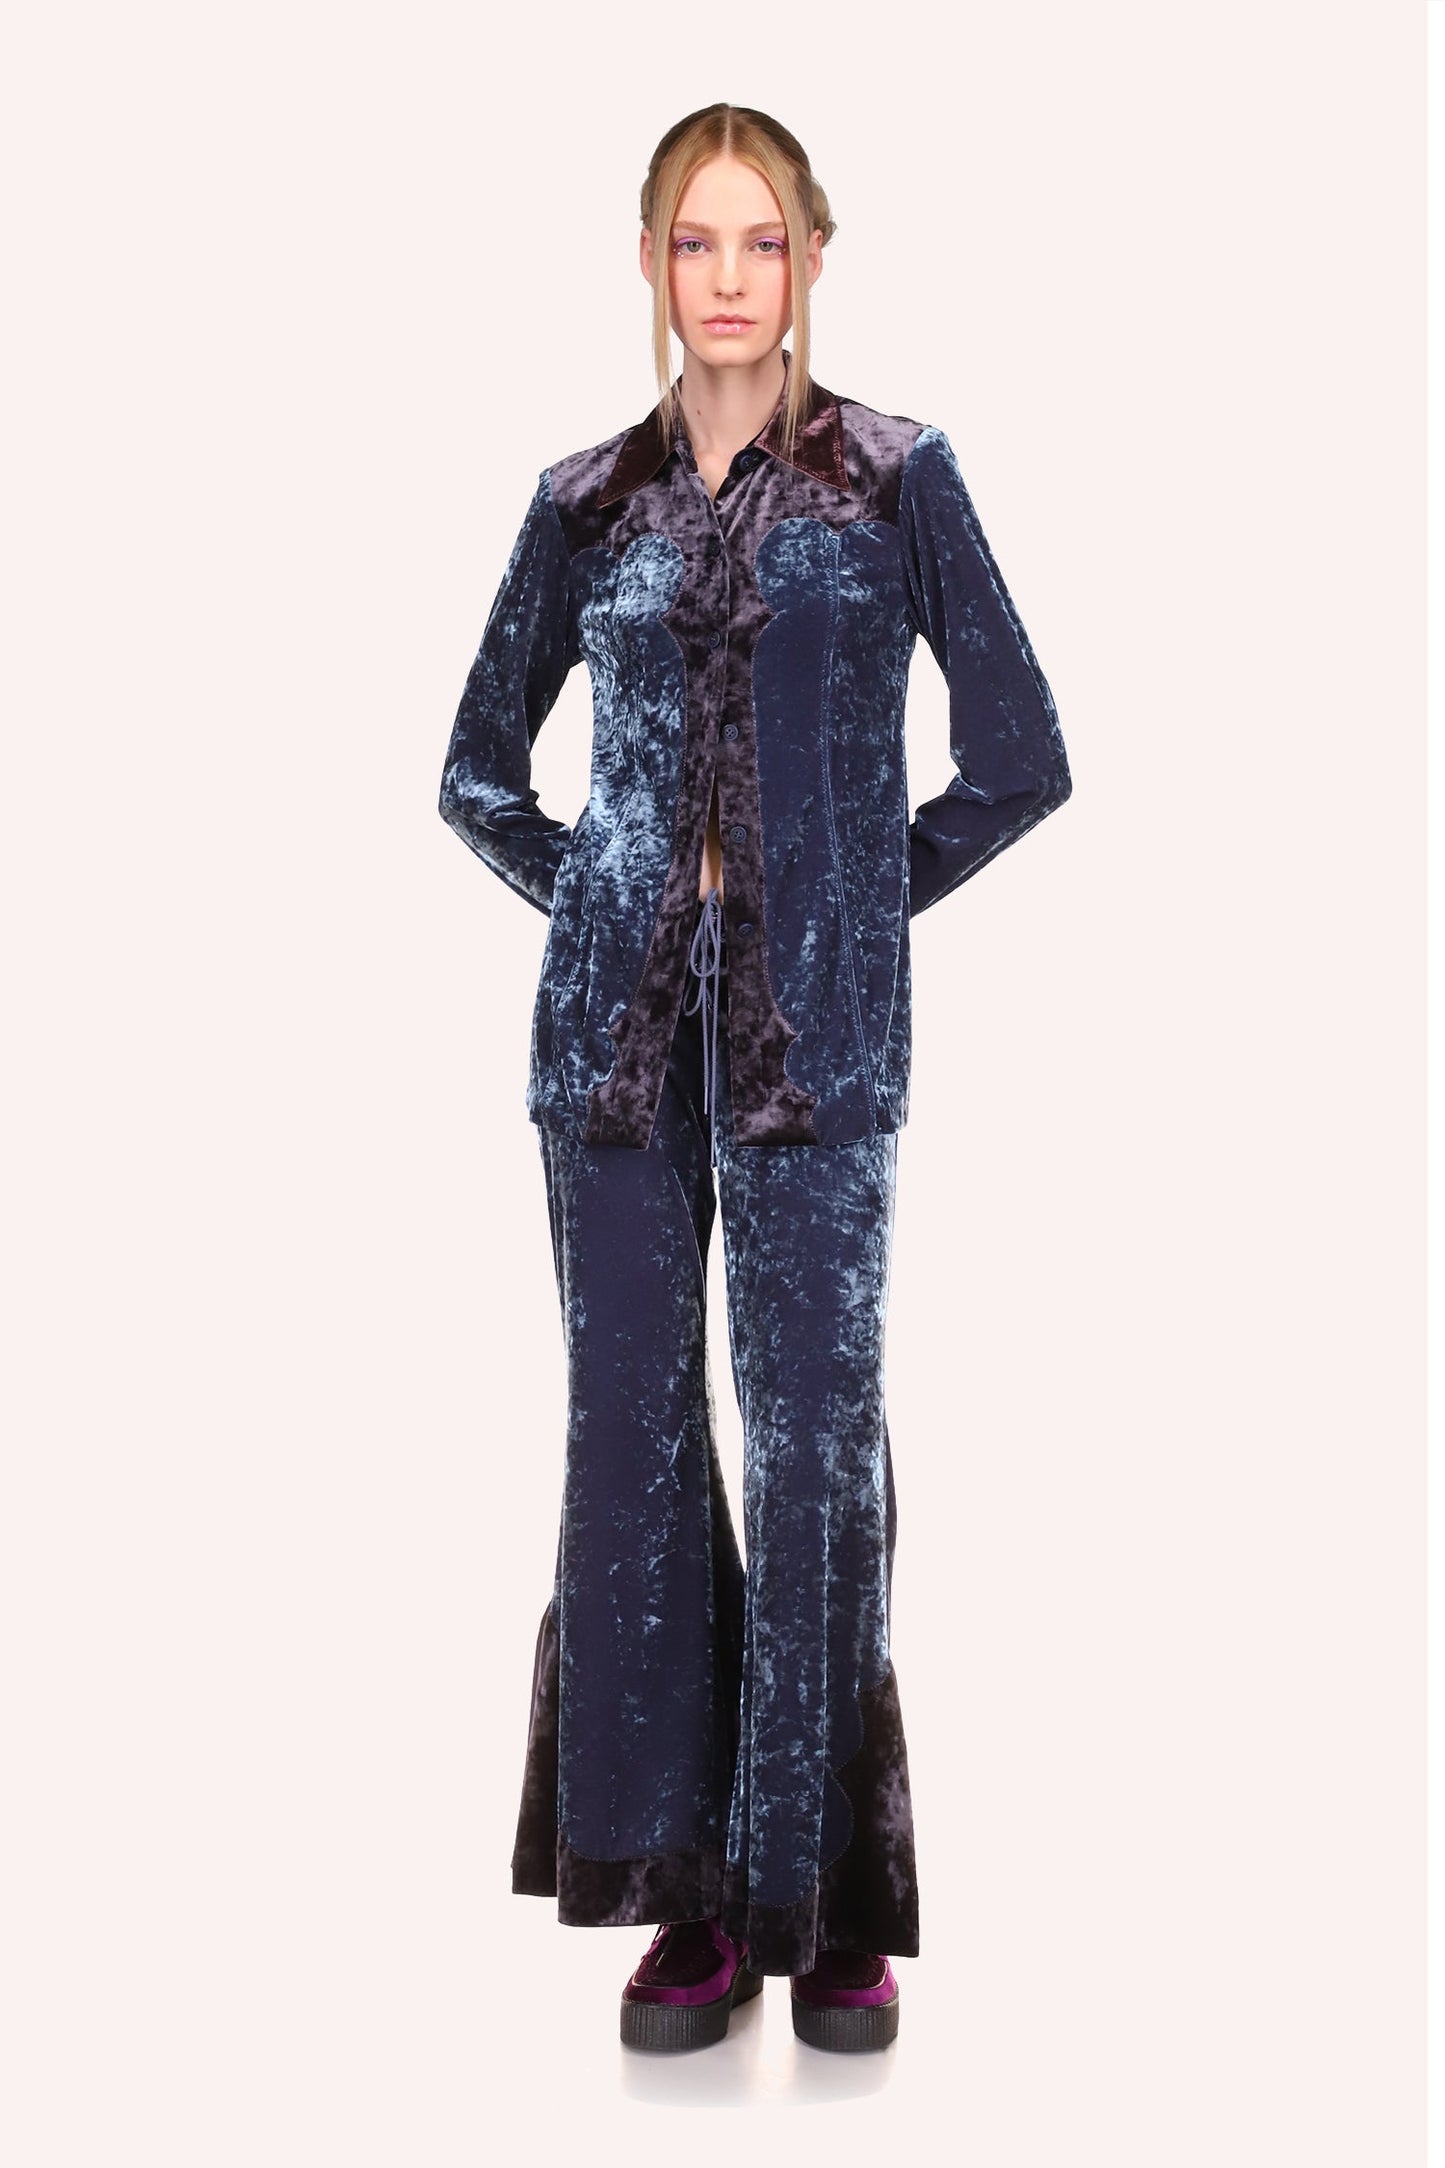 Stretch Velvet Top Slate Blue can be worn without anything underneath and still look classy